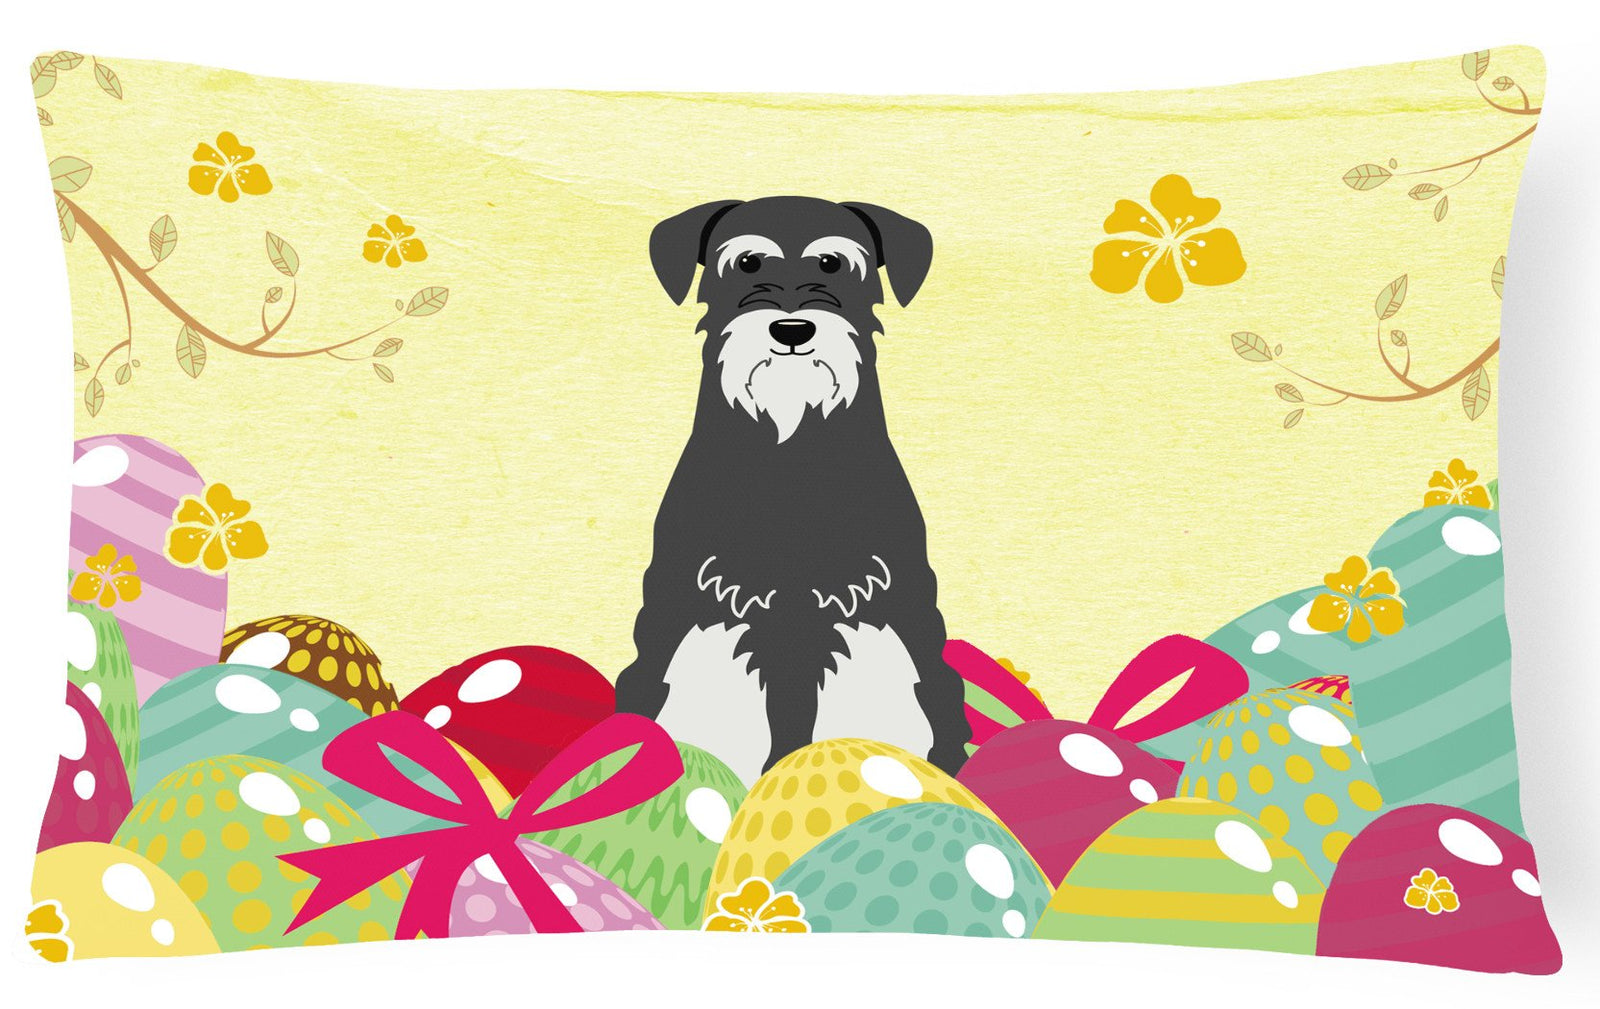 Easter Eggs Standard Schnauzer Salt and Pepper Canvas Fabric Decorative Pillow BB6033PW1216 by Caroline's Treasures